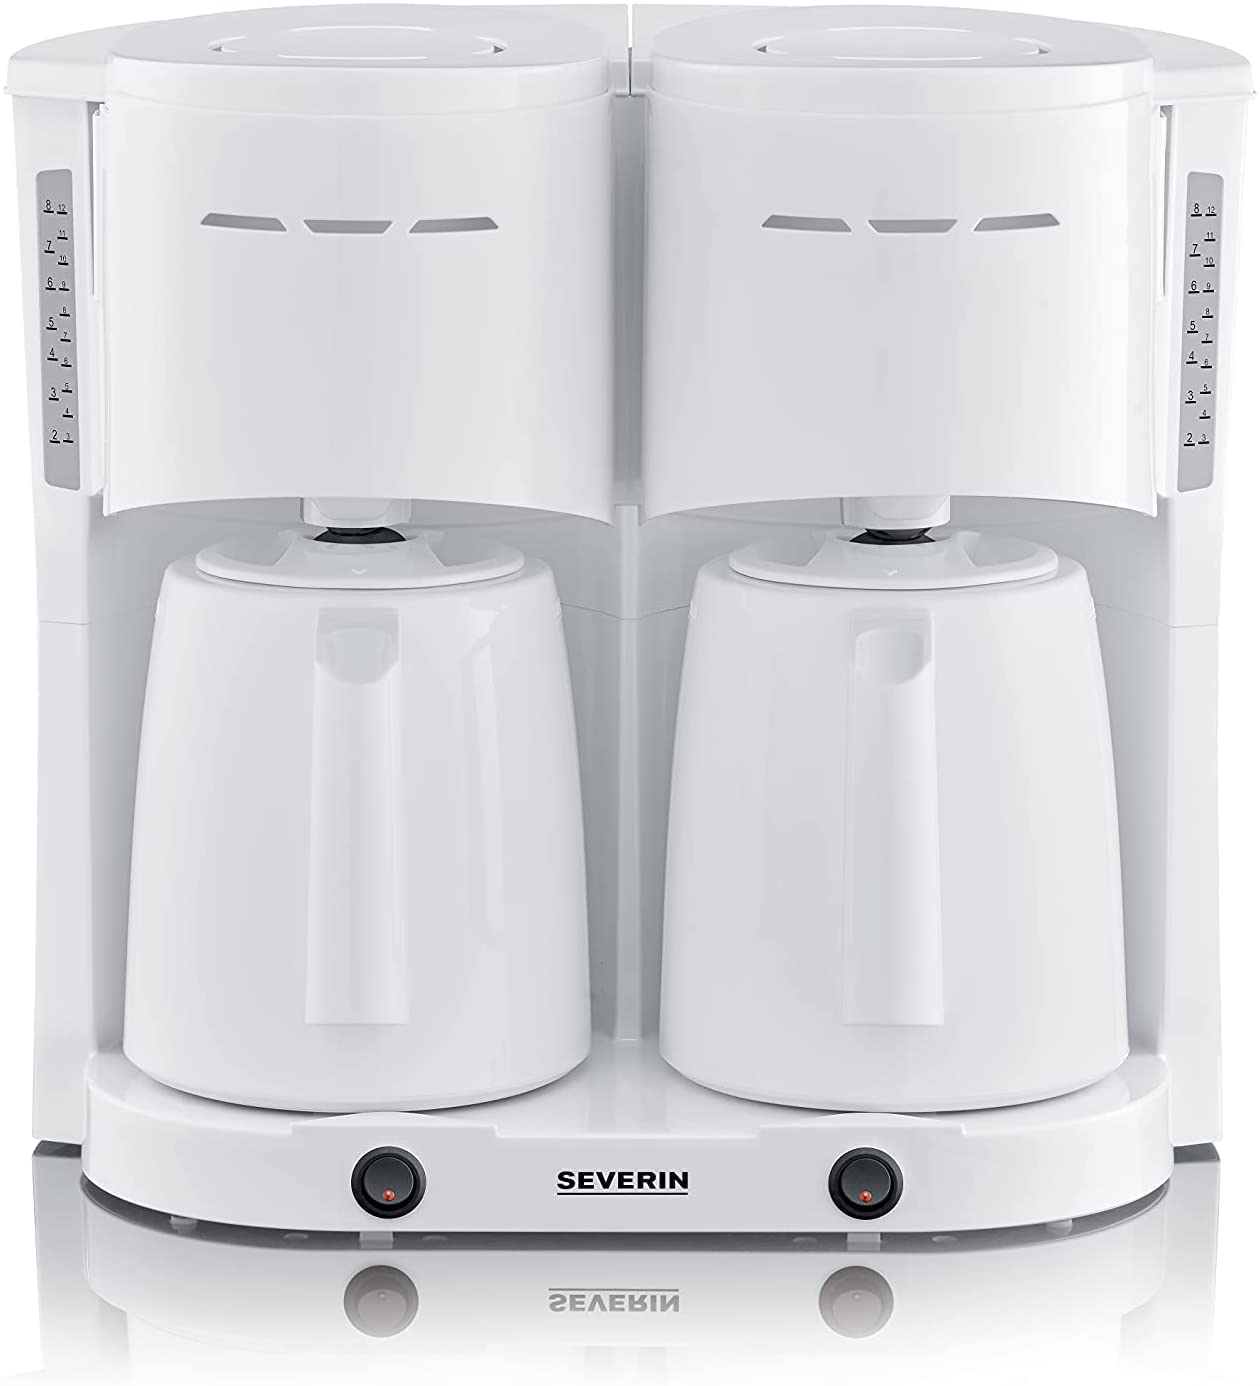 SEVERIN KA 5830 Duo Filter Coffee Machine with 2 Thermal Jugs for up to 8 Jugs, 2 x 1,000 Watt, White